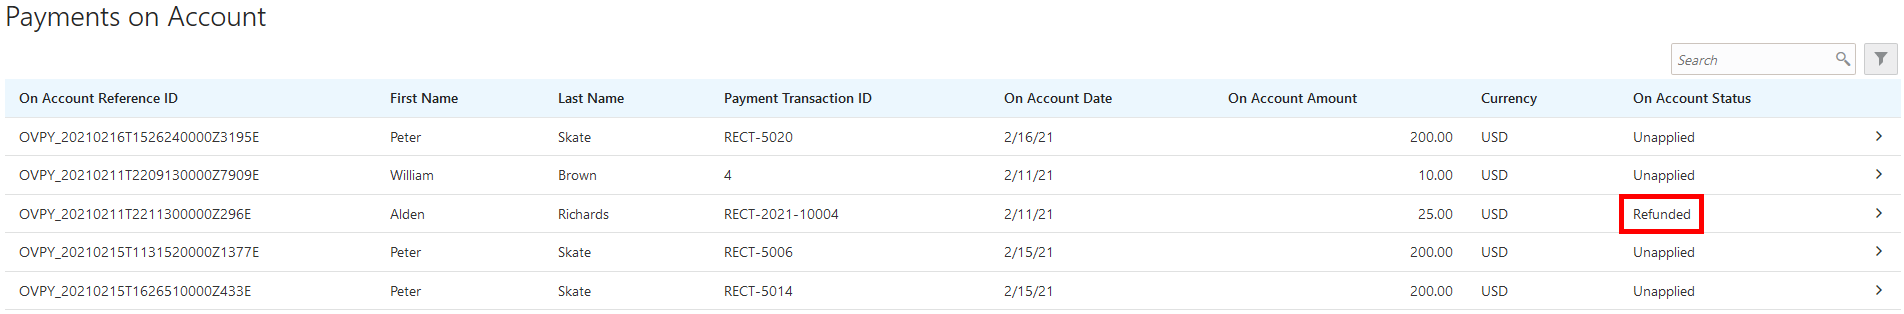 Example of the Payments on Account page after a refund is processed